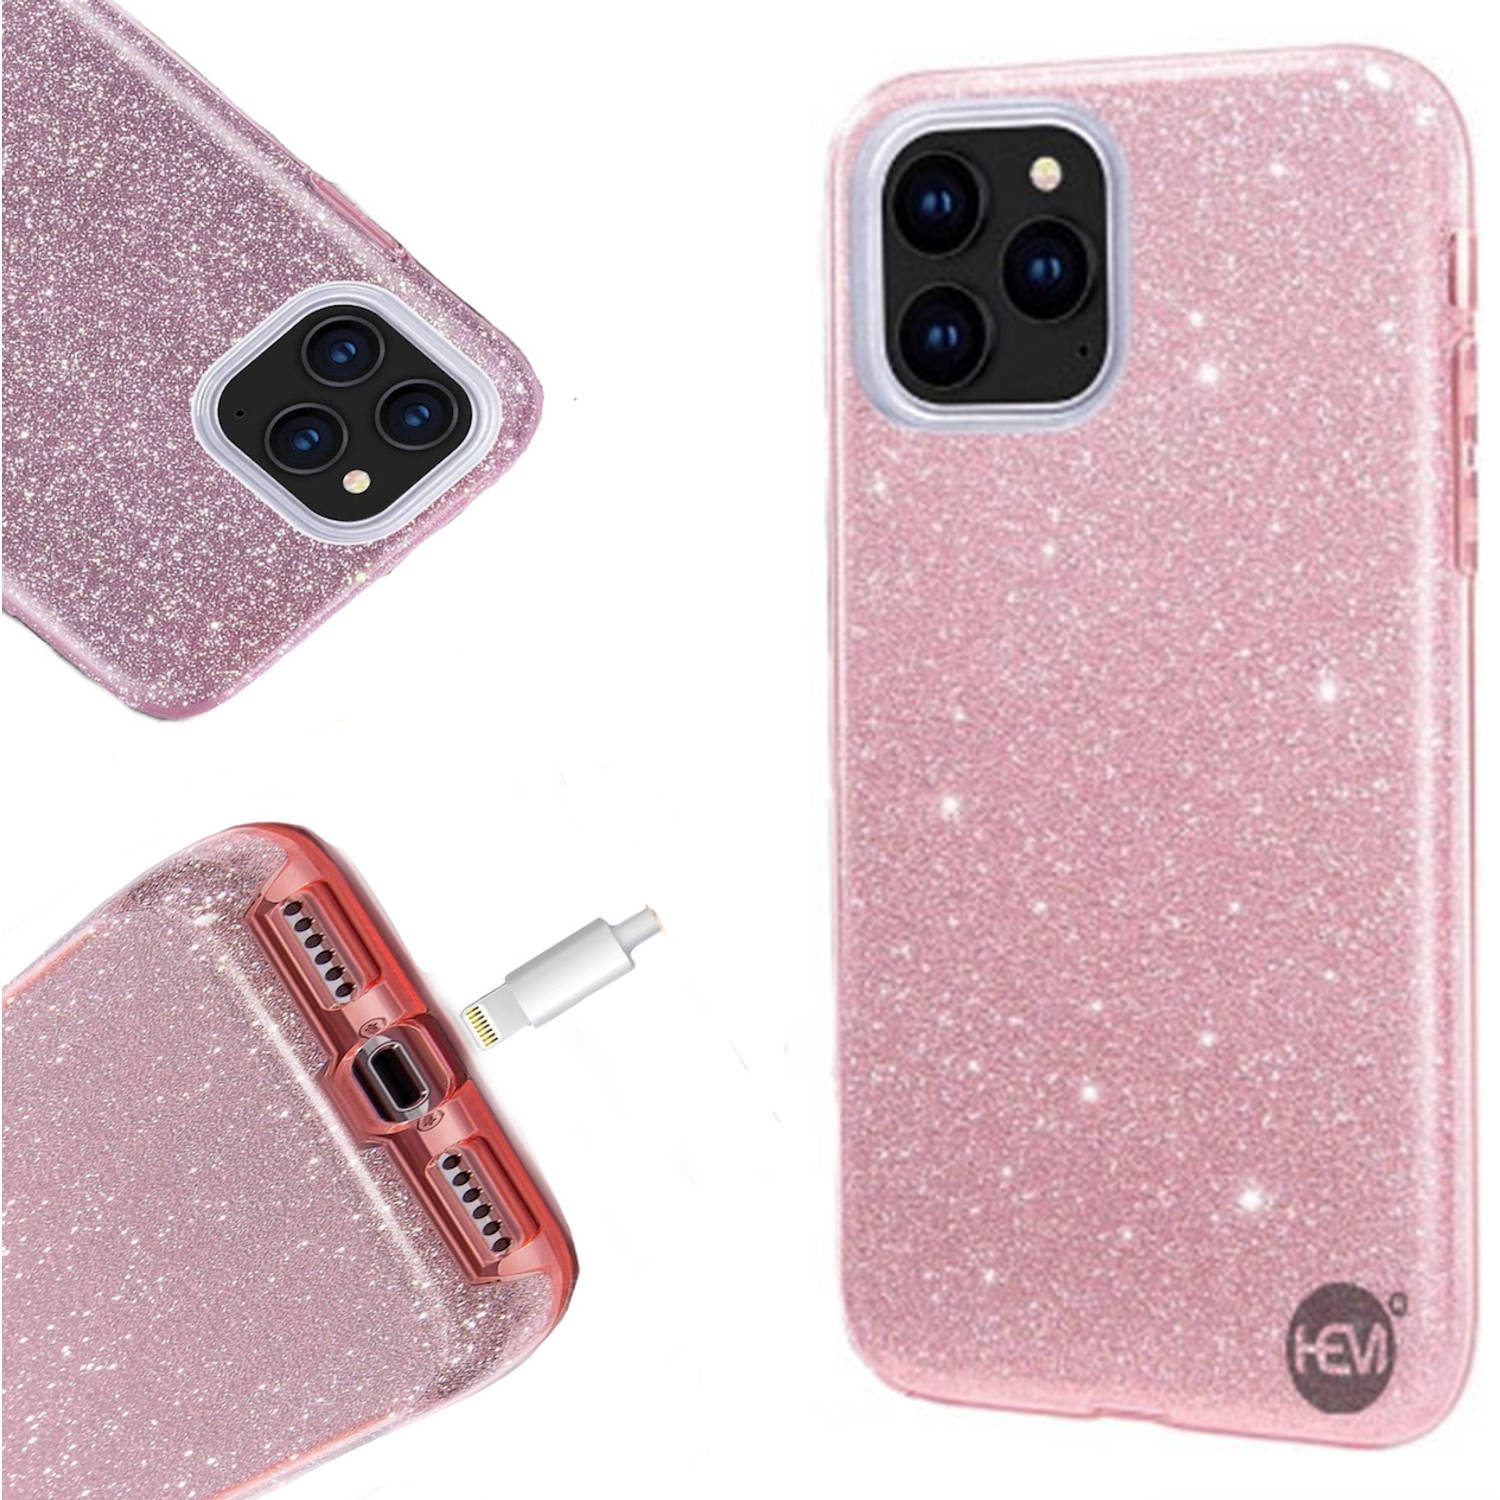 Apple iPhone 12 Pro Max Glitter Roze Siliconen Gel TPU / Back Cover / Hoesje iPhone 12 Pro Max